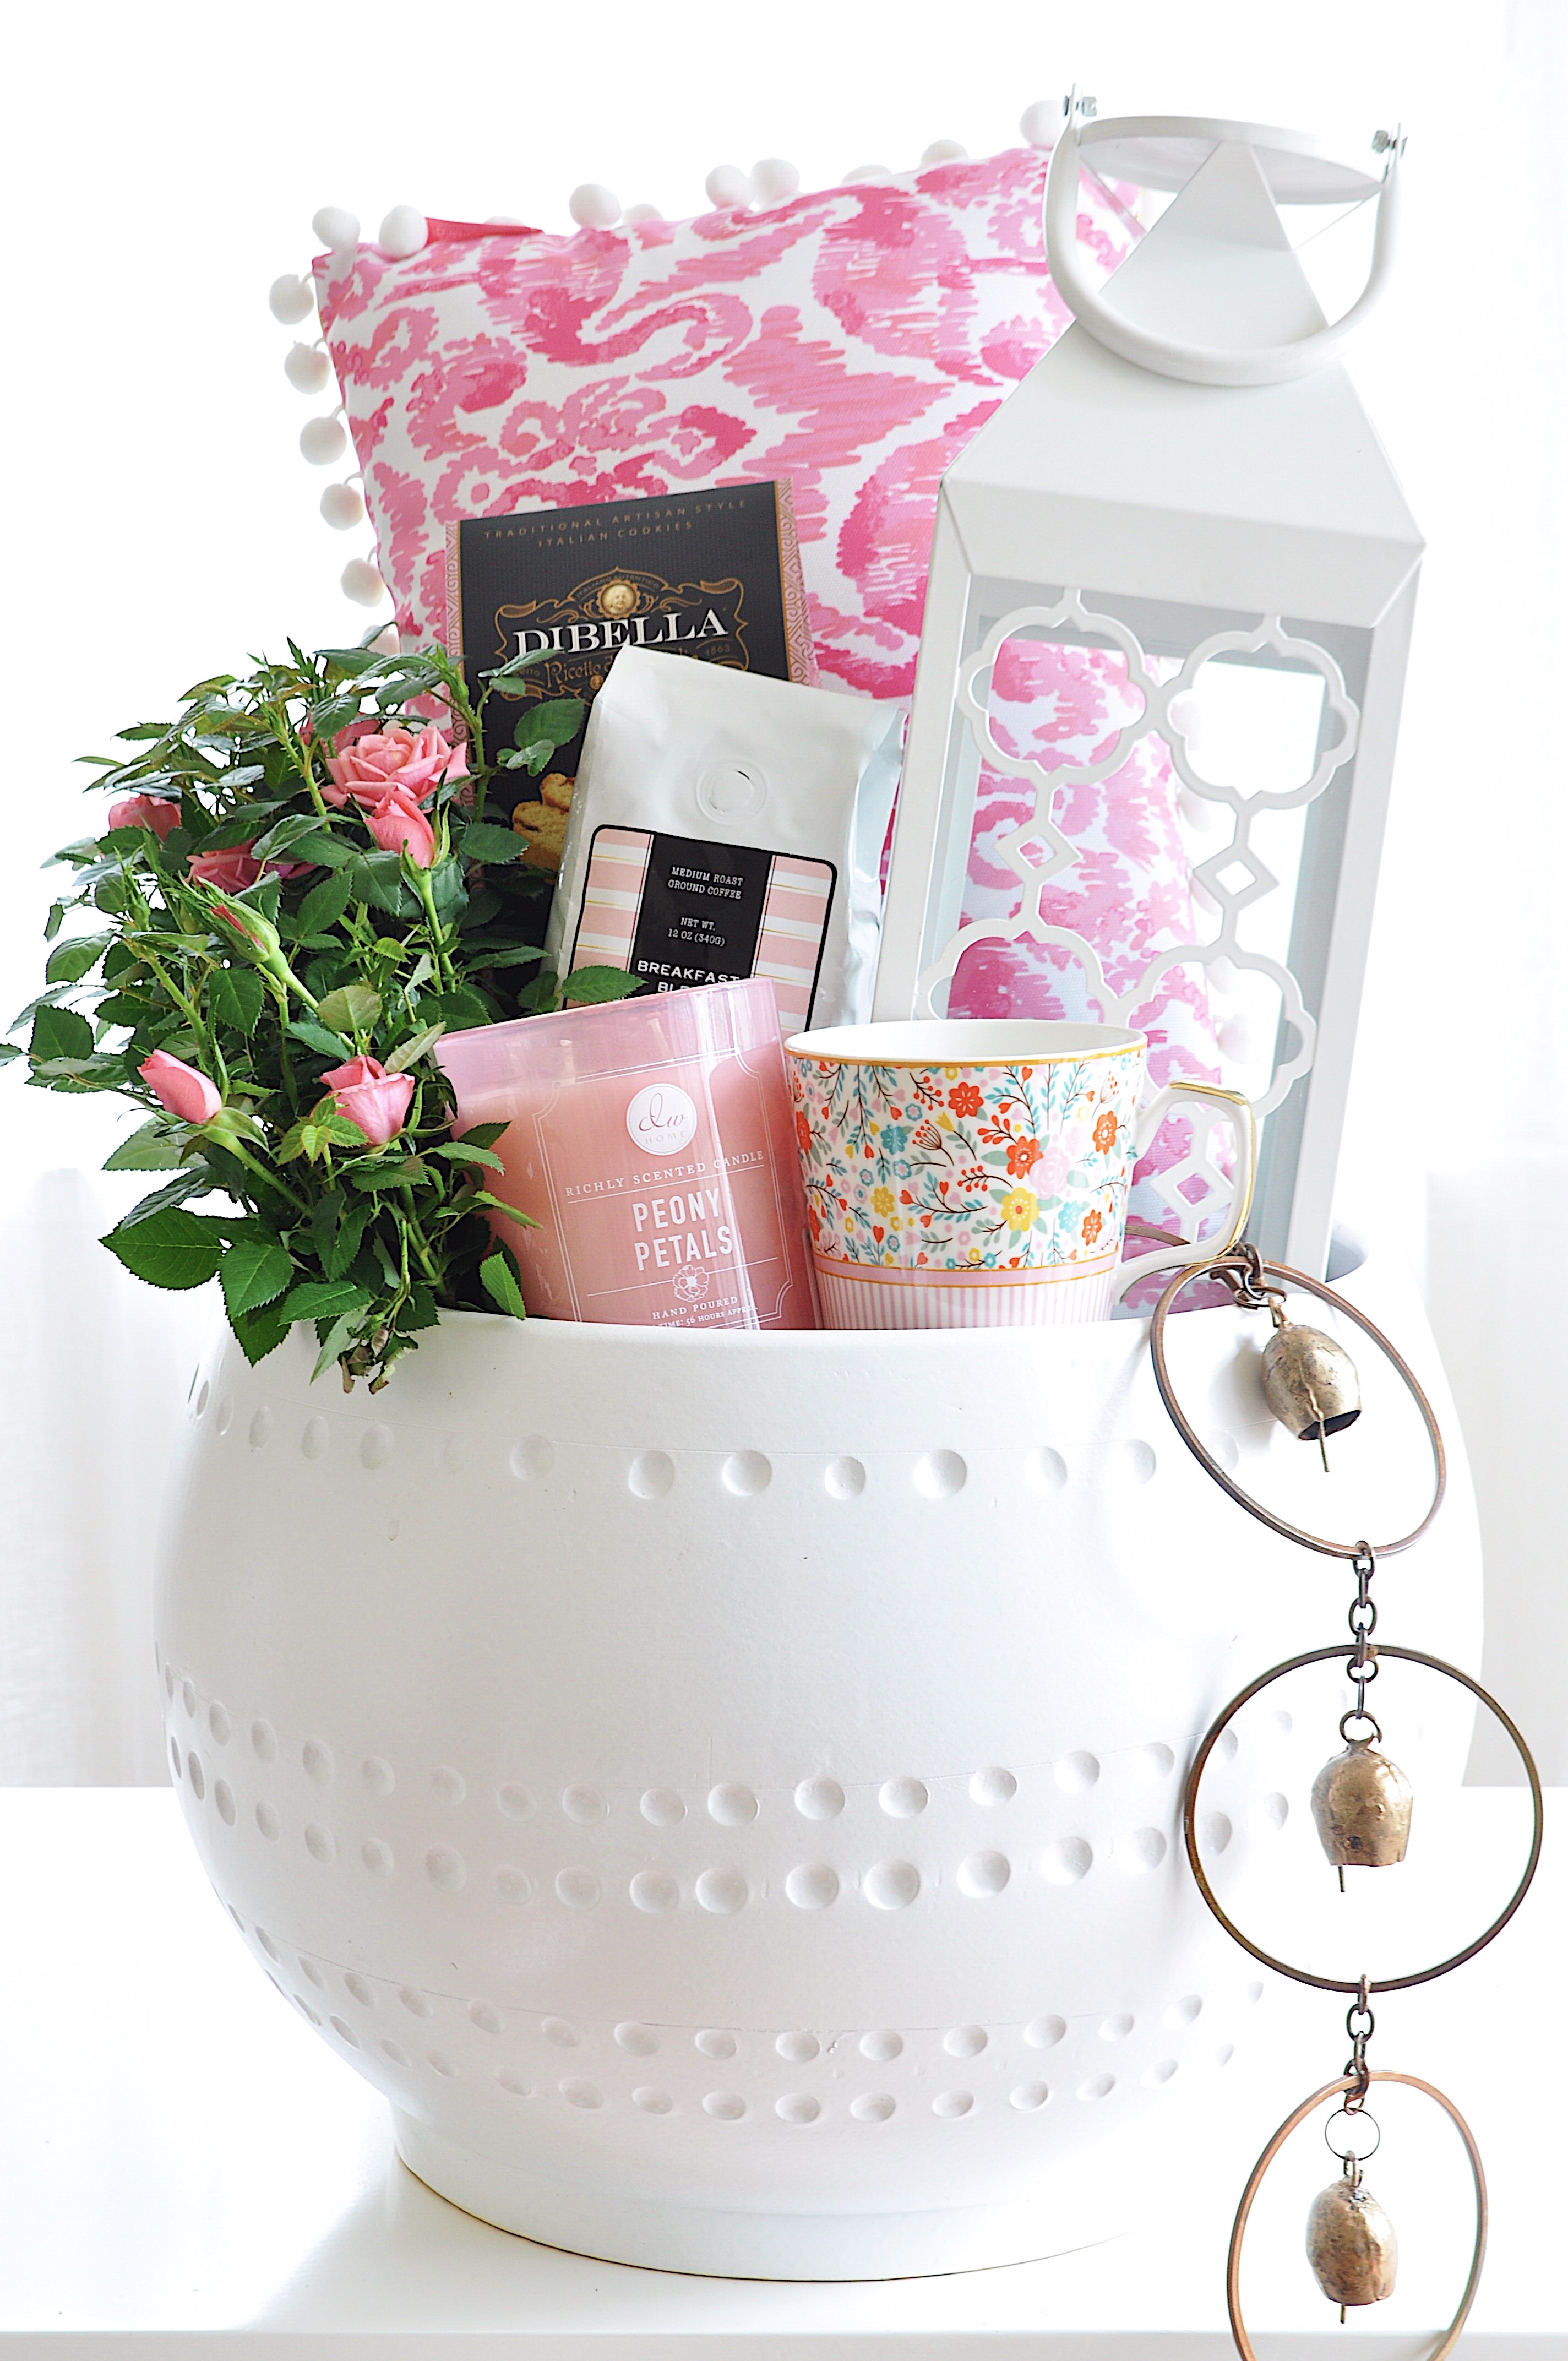 Birthday Gifts for Women, Pink Gift Basket Idea for Mom Sister Best Friends  Coworker with Gift Card Bath Bomb Towel Scented Candle for Bridal Shower  Retirement Unique Friendship Gift Box for 30th